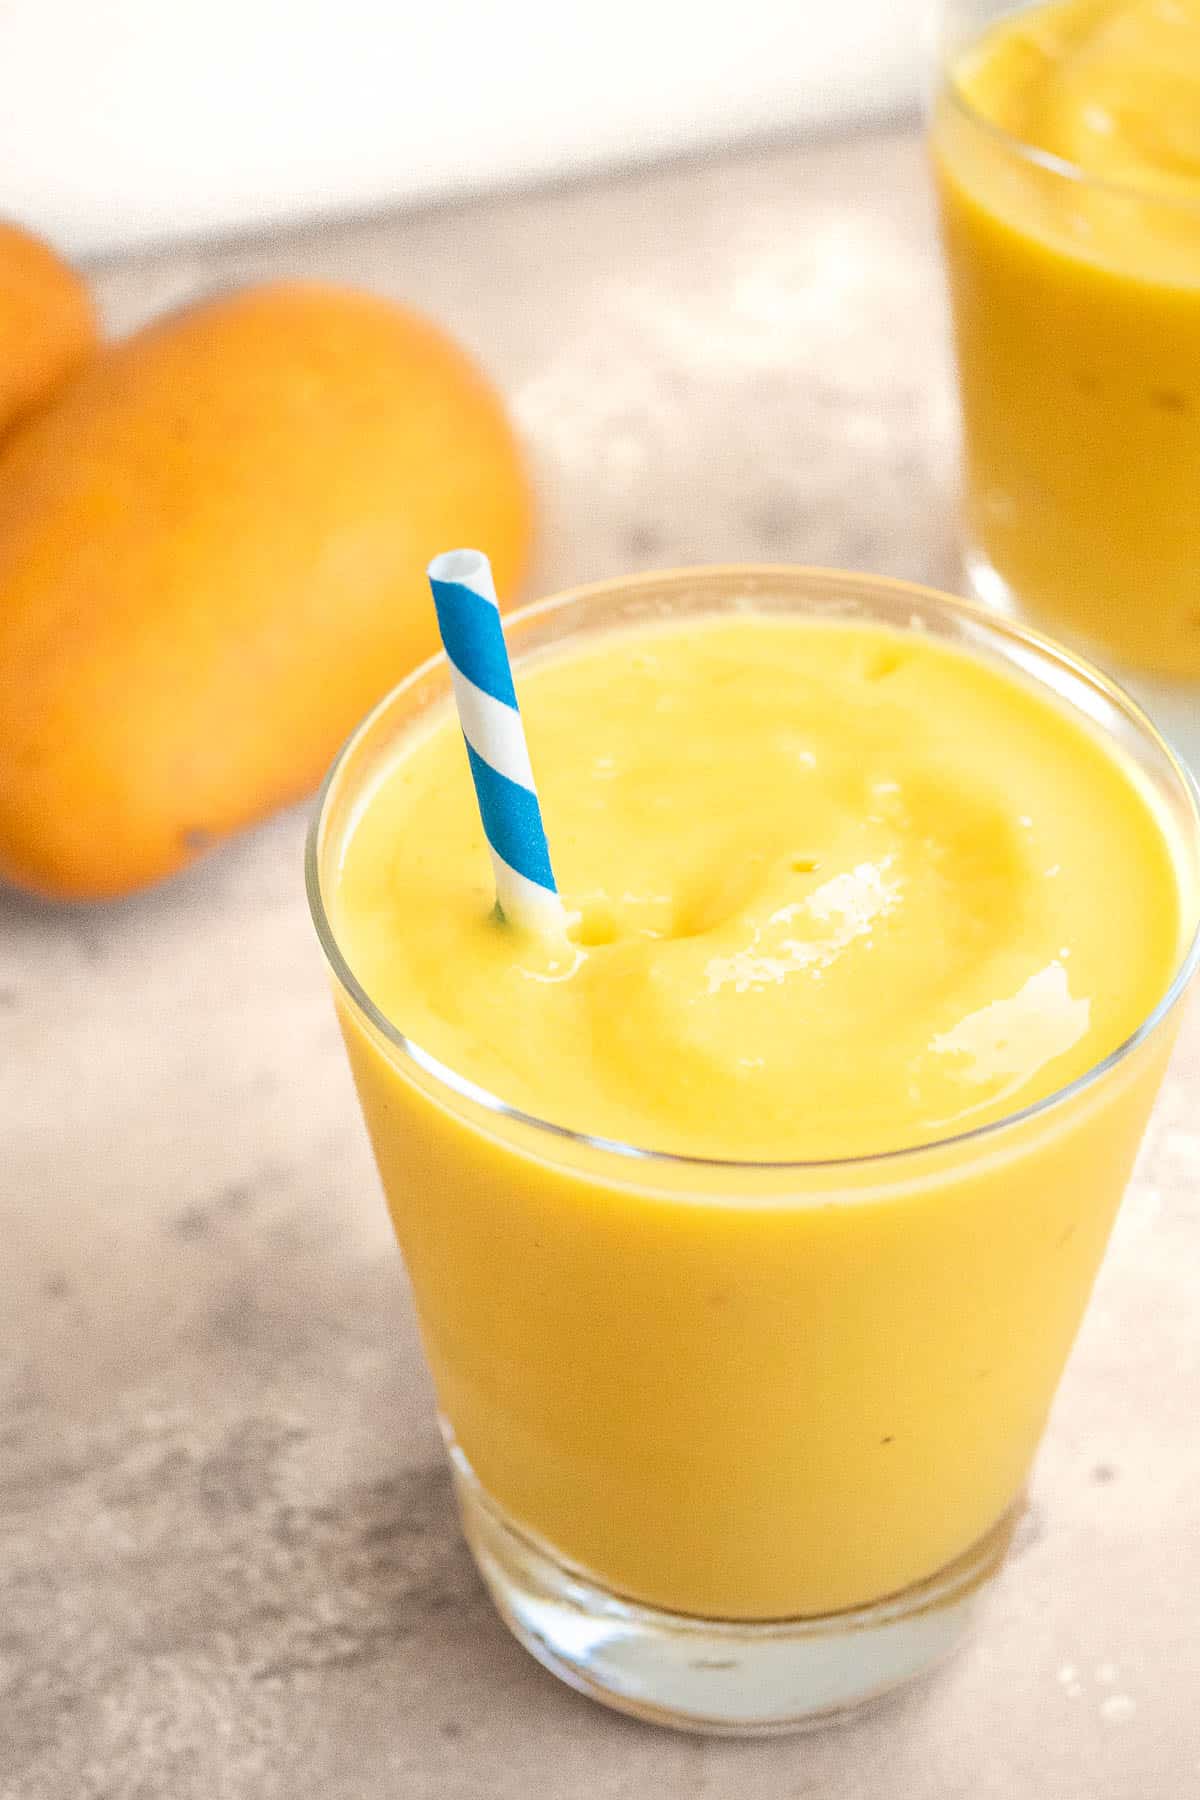 Mango smoothie in a glass with a blue and white striped straw.